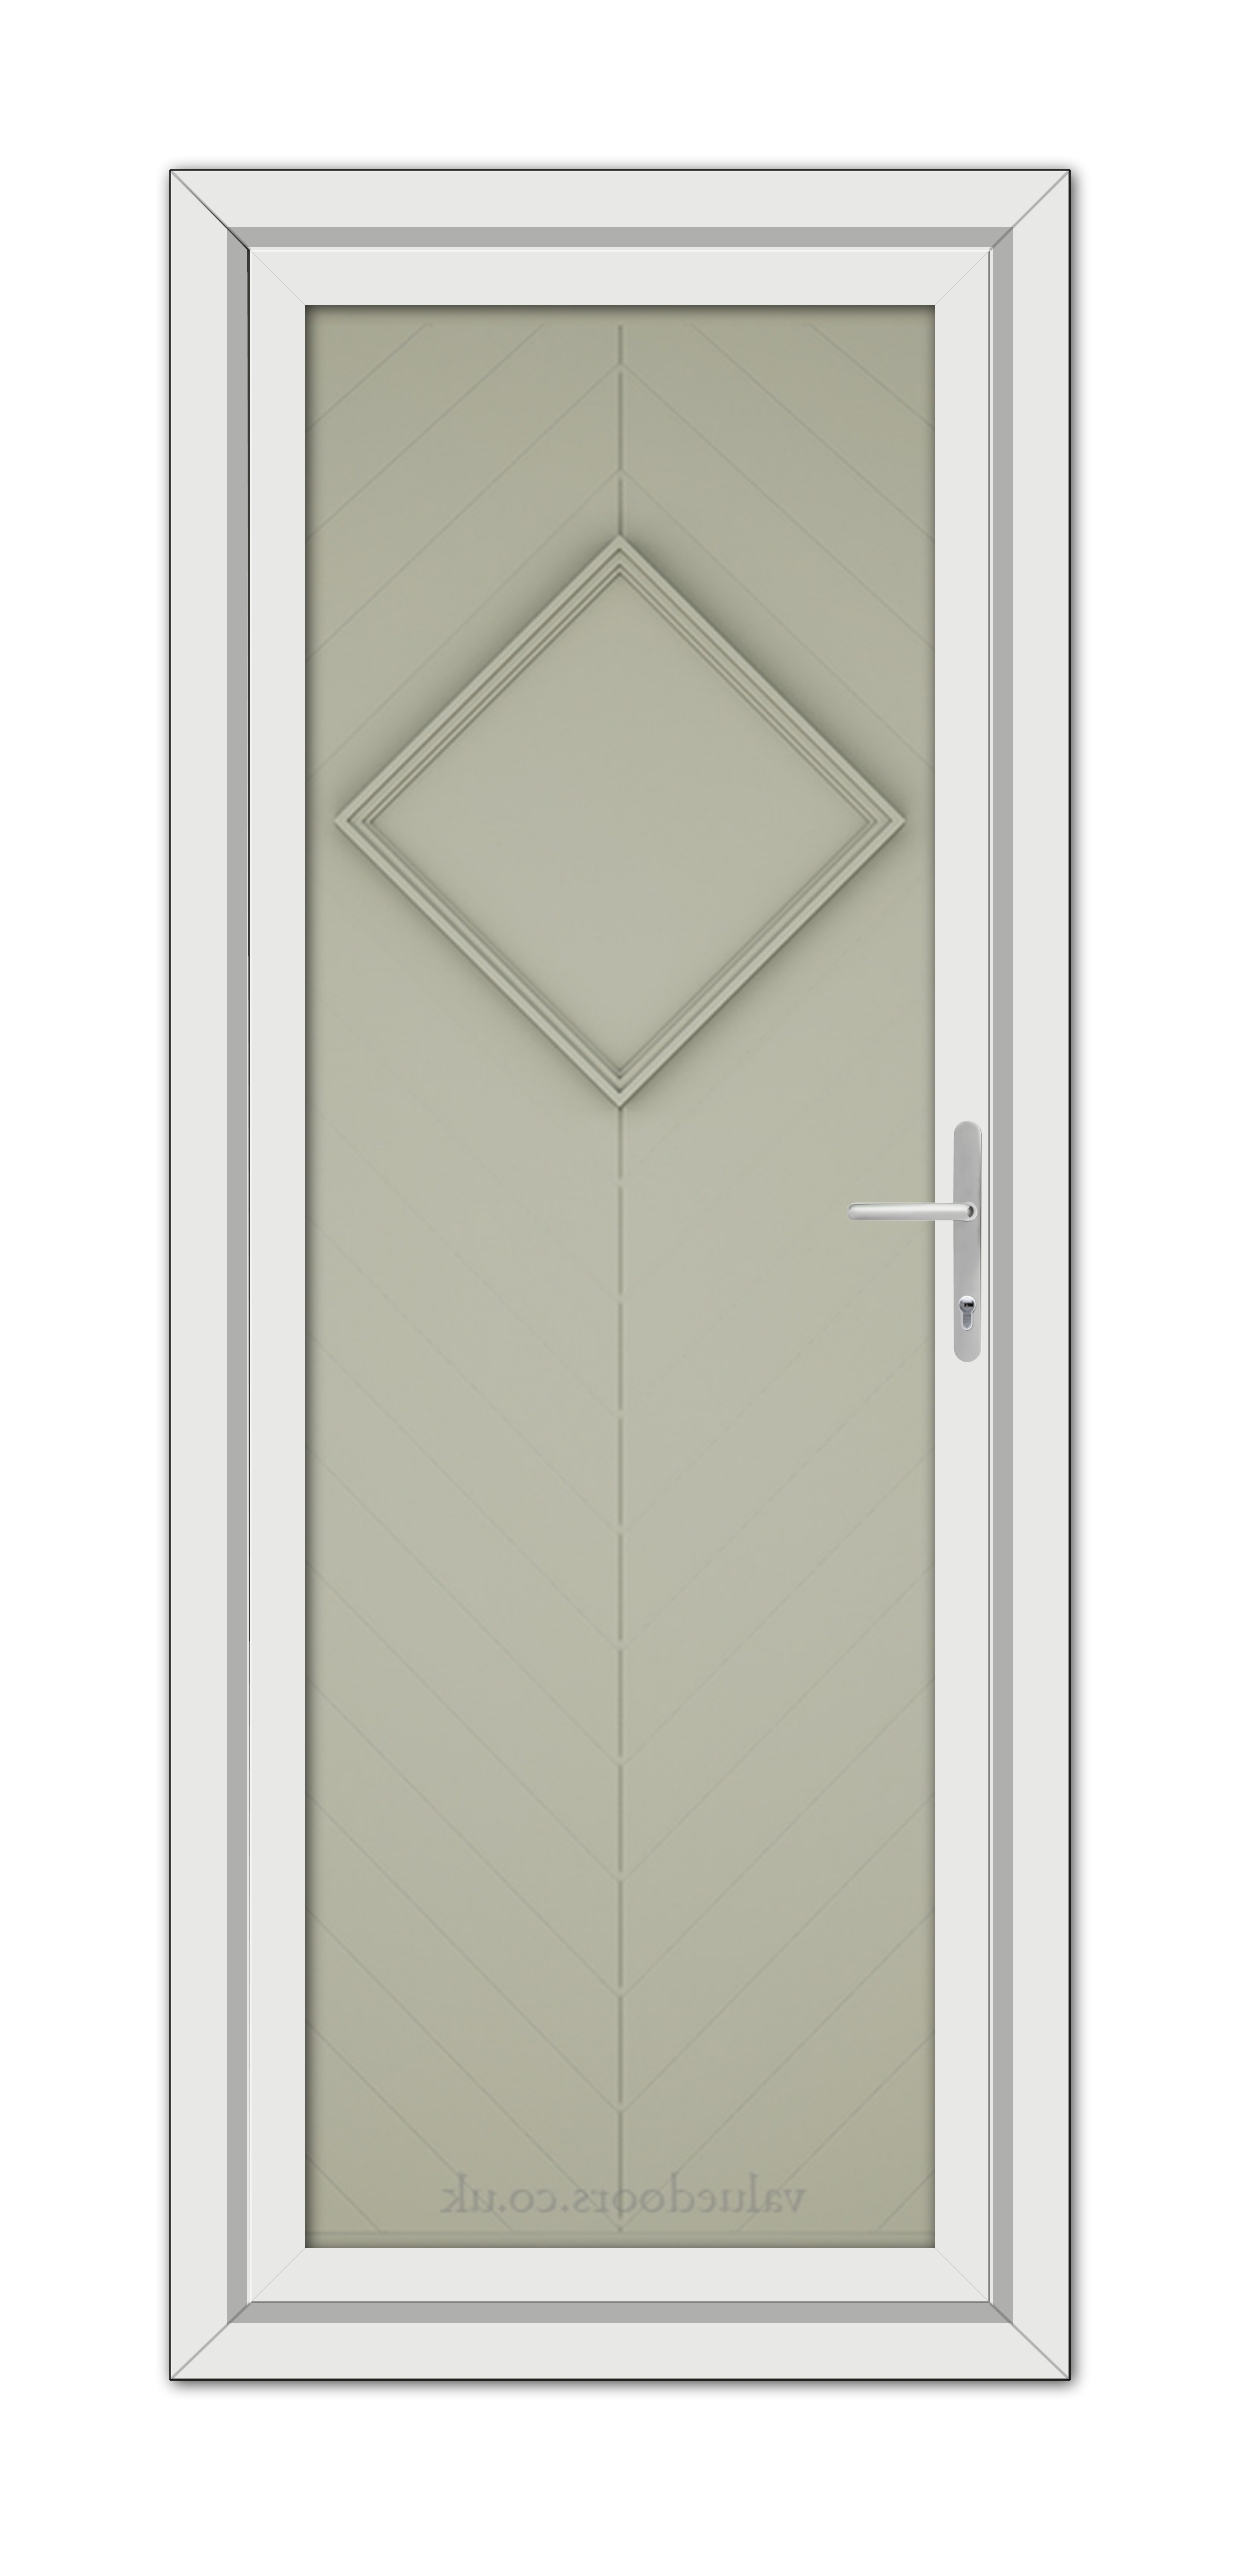 Vertical image of a Agate Grey Hamburg Solid uPVC Door featuring a white frame, diamond-shaped window, and a metal handle, isolated on a white background.